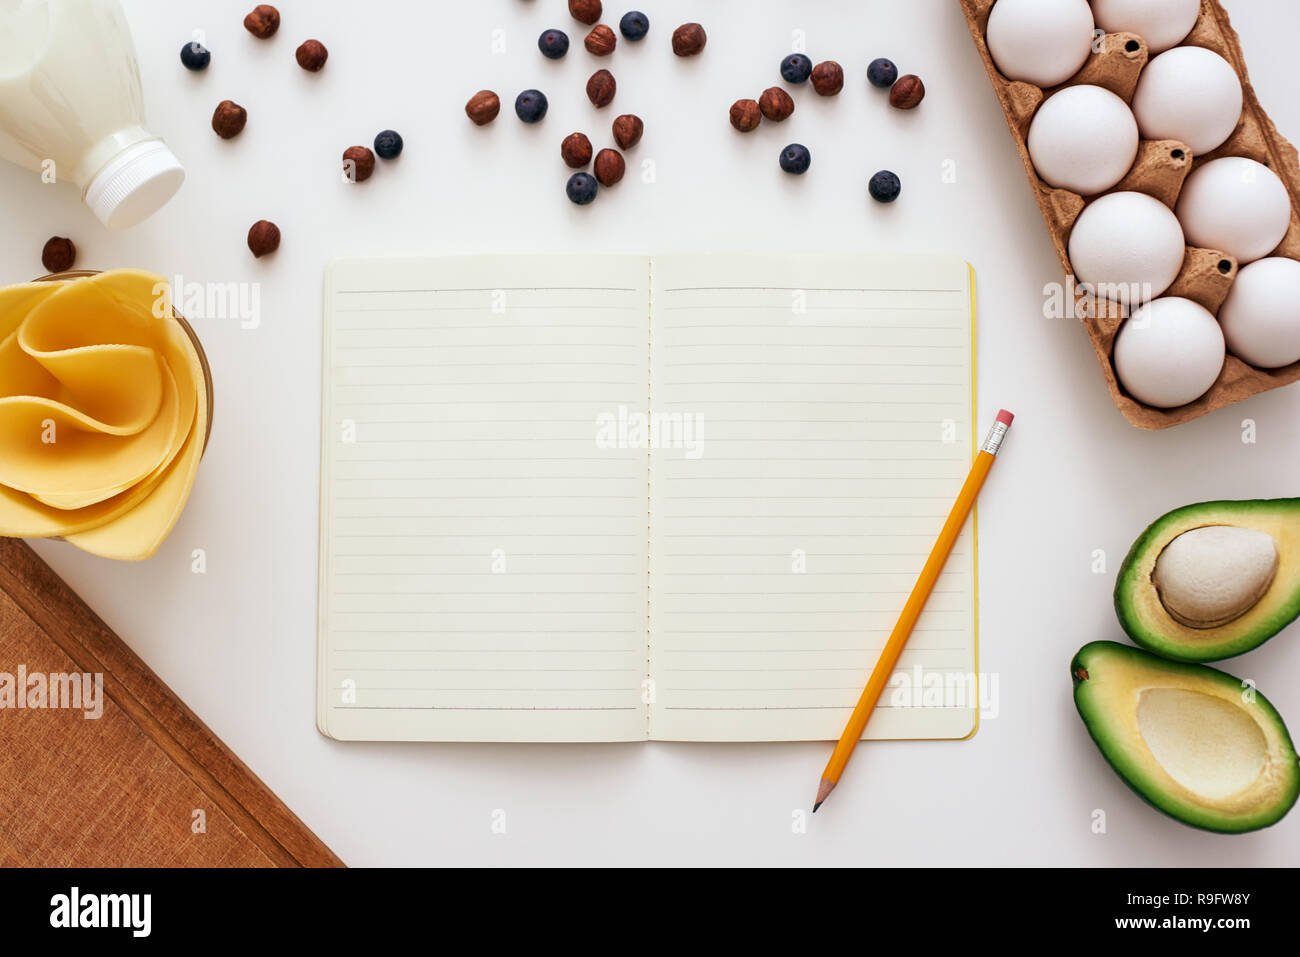 Ready to write a recipe. Pencil and cookbook are lying on the table near dryed berries, honey, avocado and eggs Stock Photo